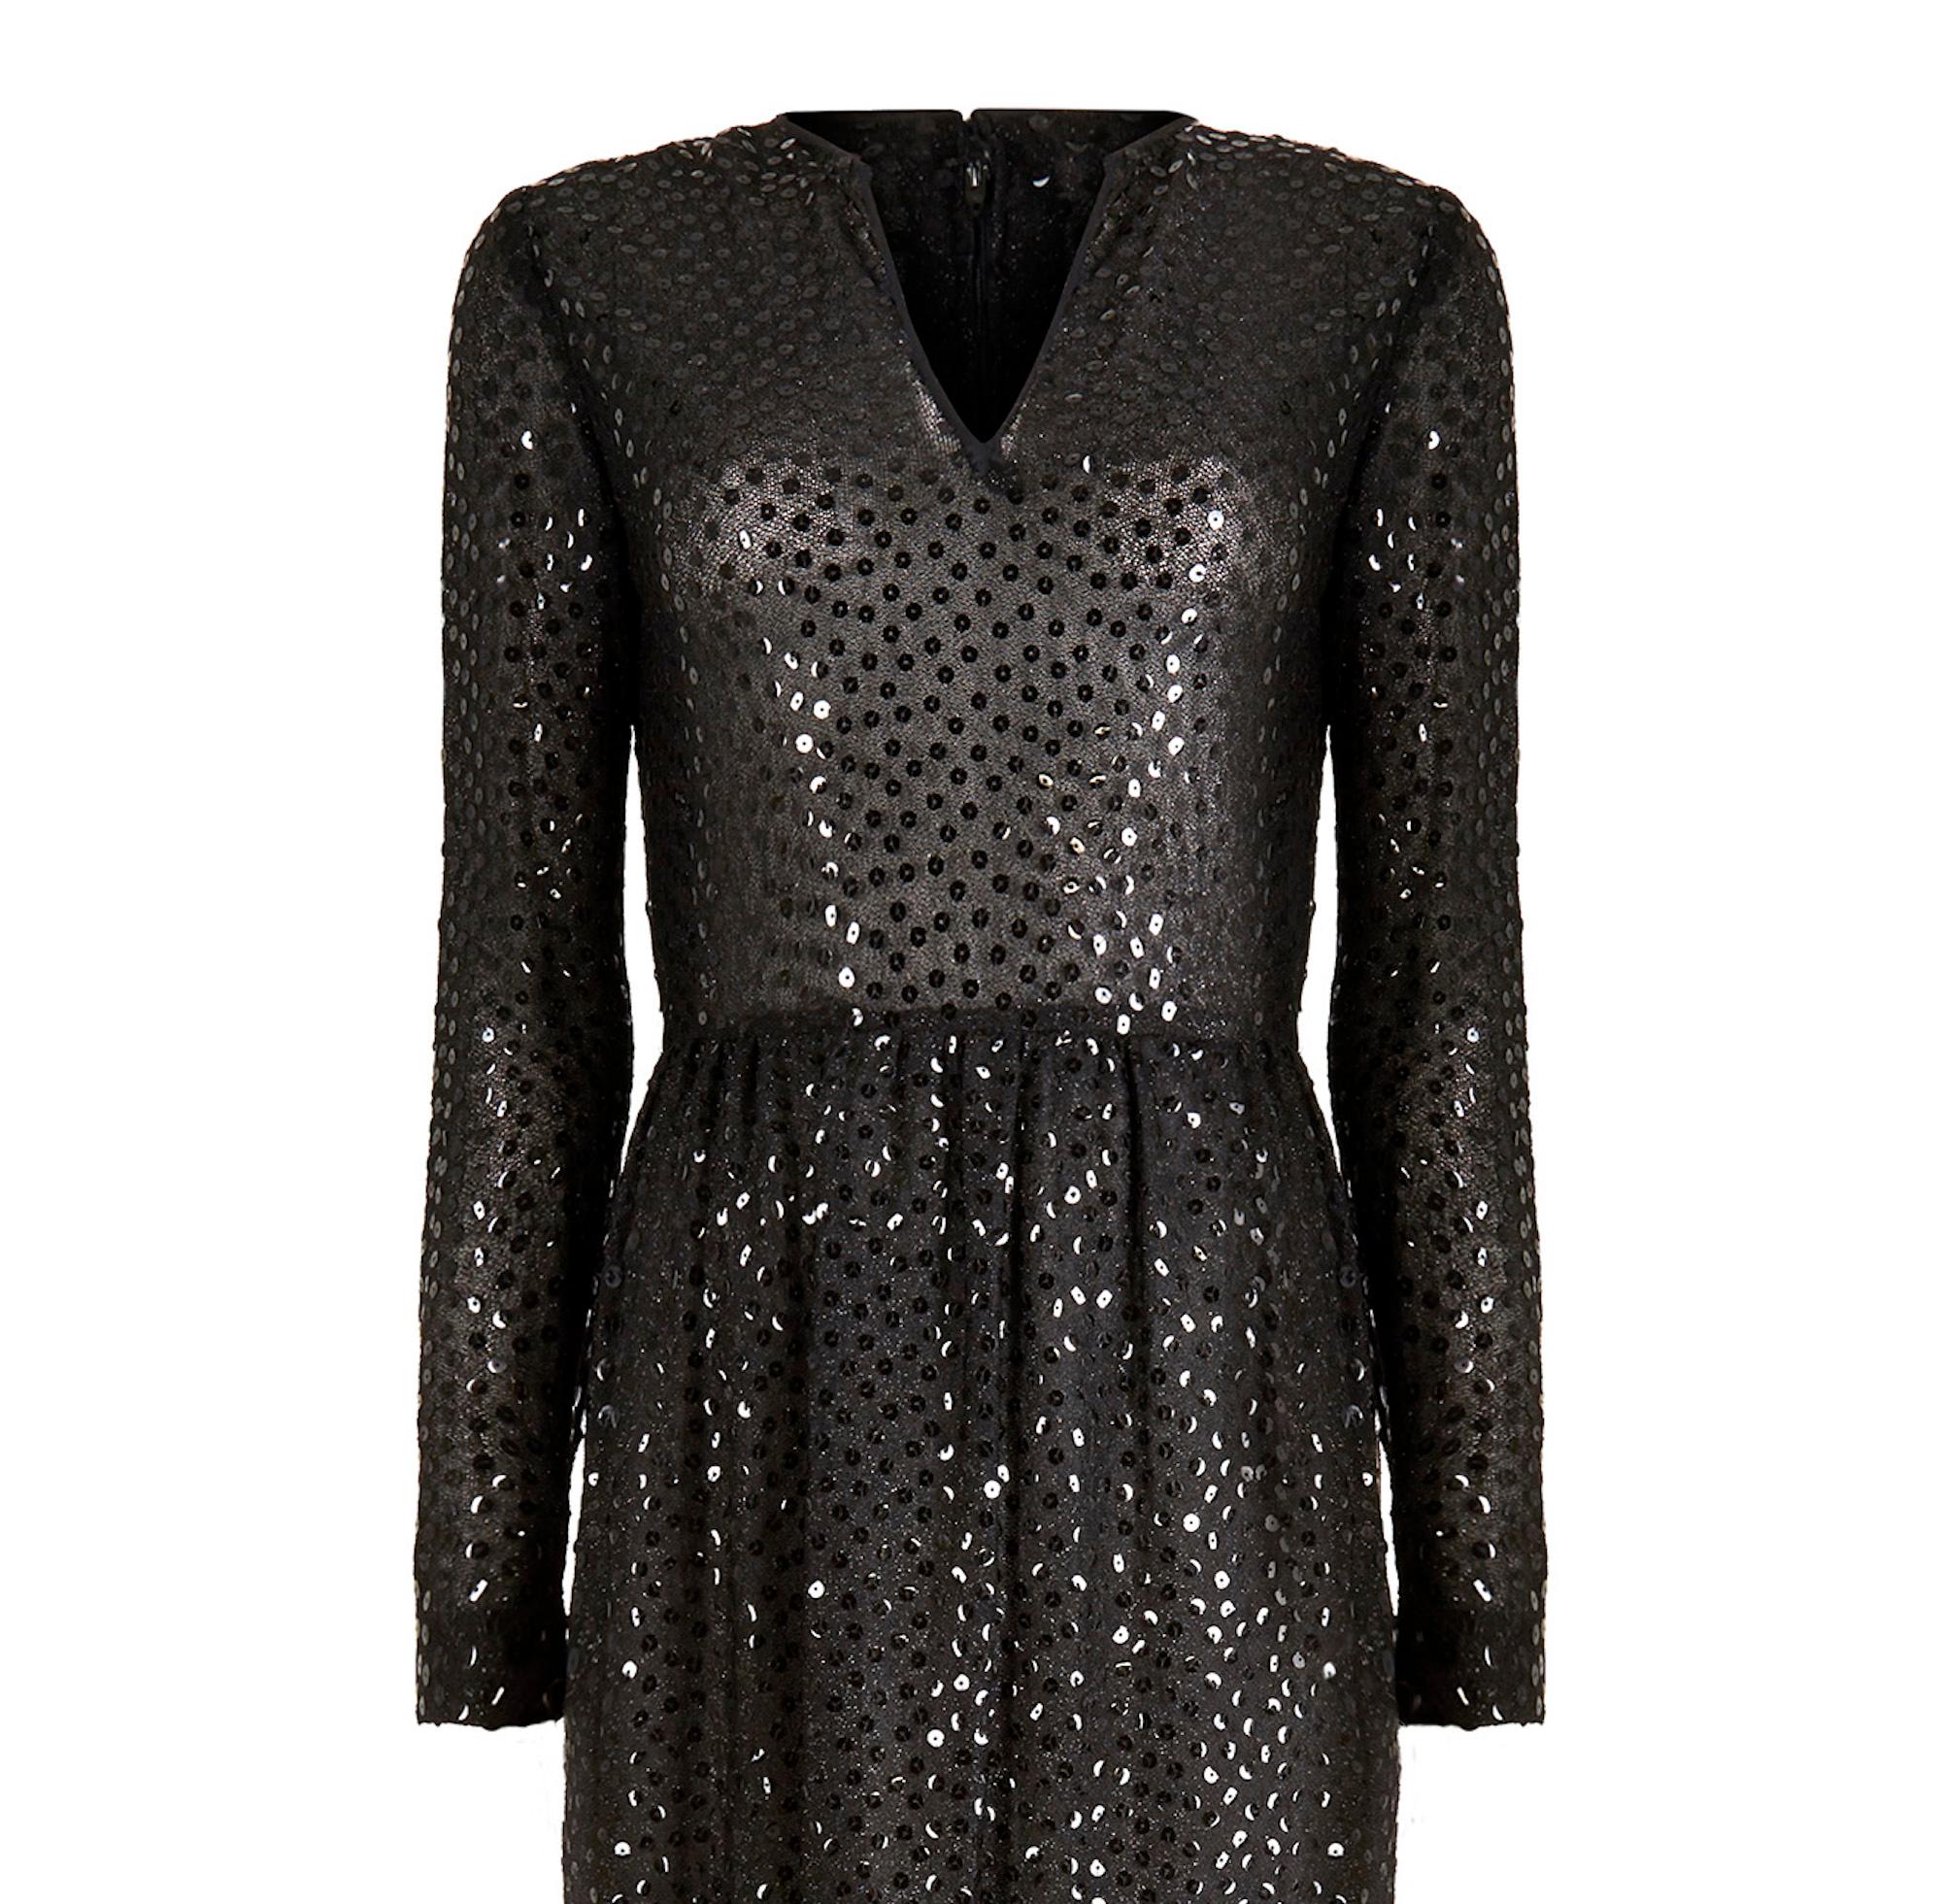 Women's 1970s Morty Sussman For Mollie Parnis Black Sequinned Dress For Sale